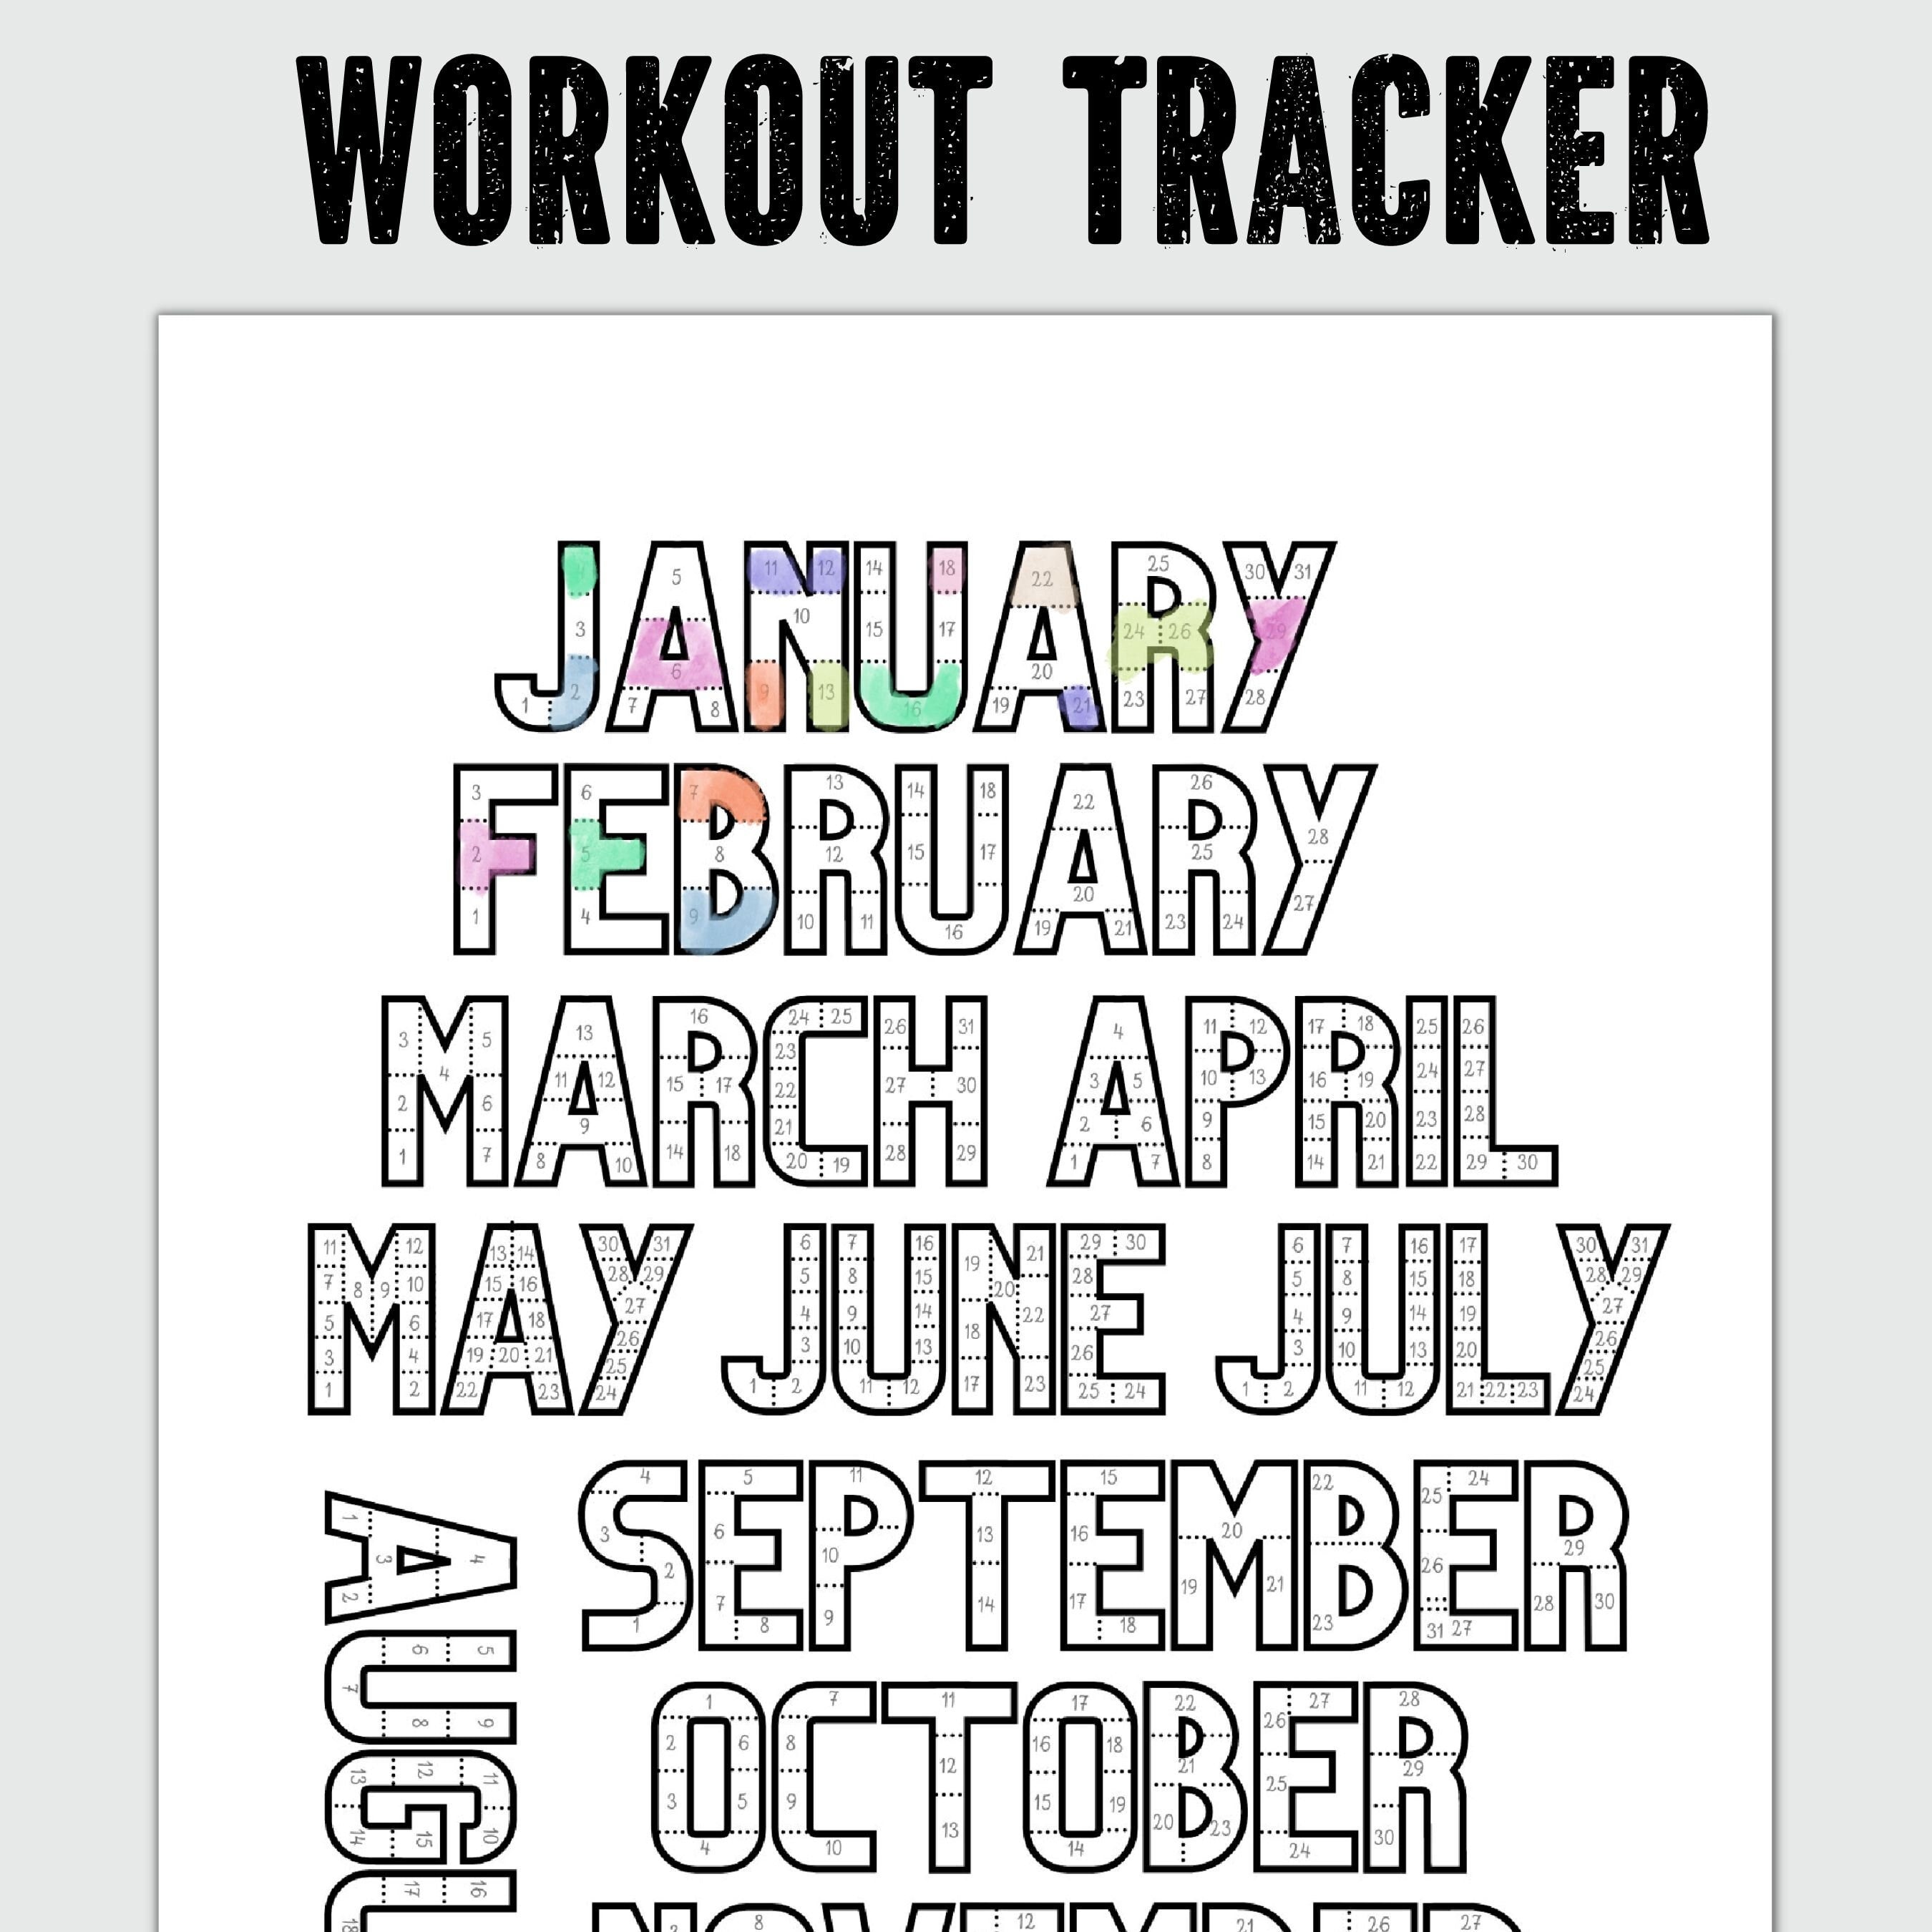 Sticker Sheet Fitness Journal Stickers, Calendar, Planner Stickers, New  Year's Resolution, Fitness, Sports, Gym, Healthy Habits, Health 